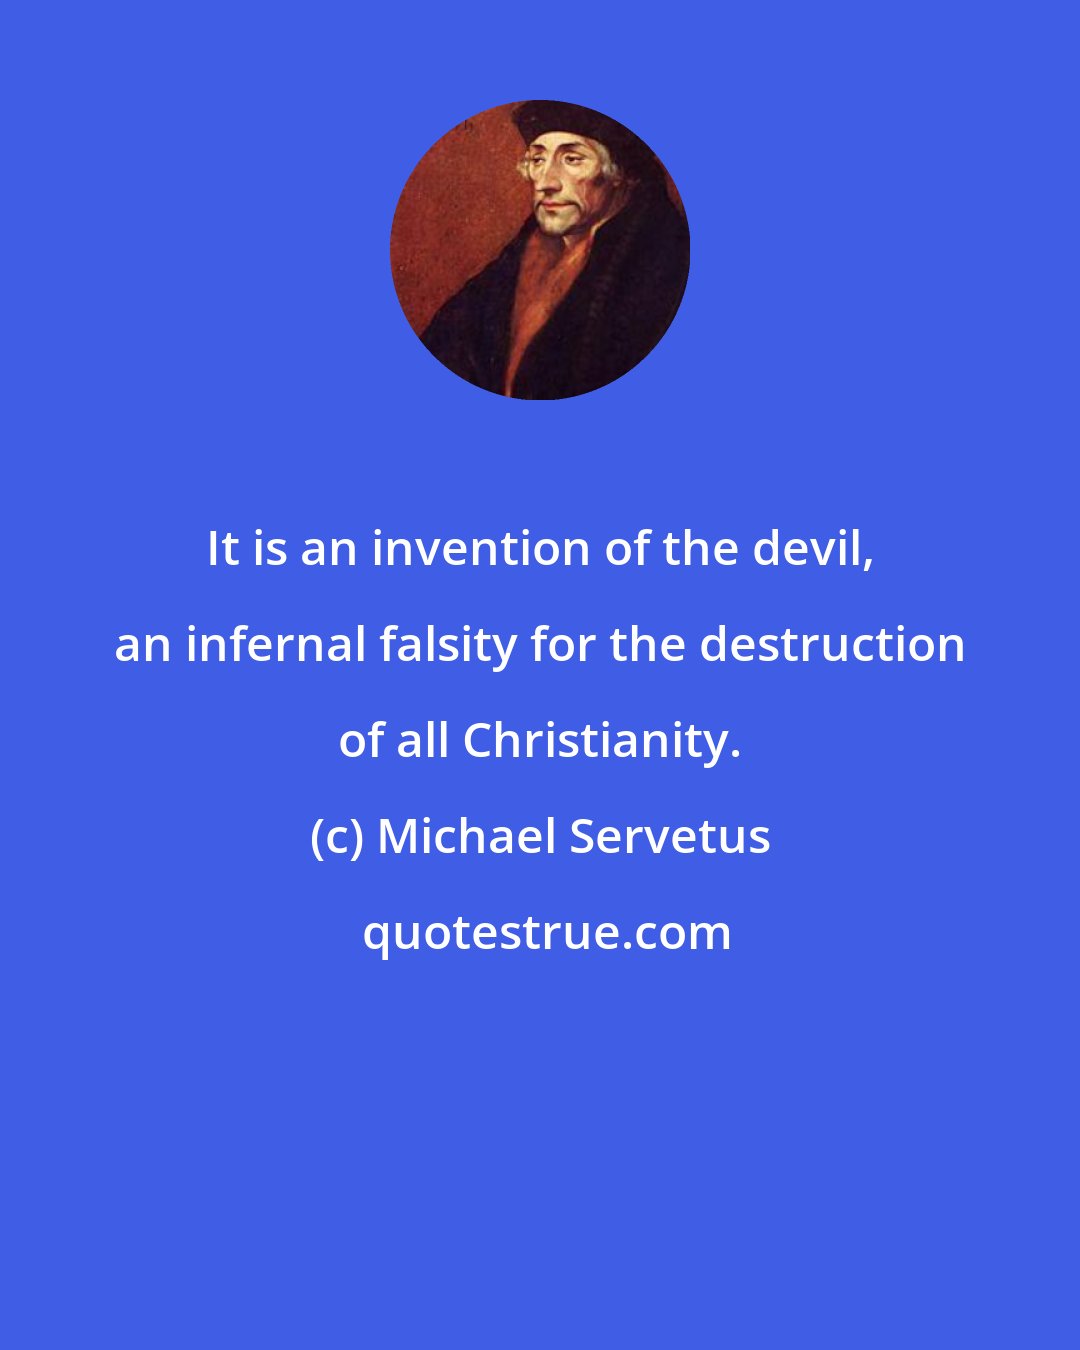 Michael Servetus: It is an invention of the devil, an infernal falsity for the destruction of all Christianity.